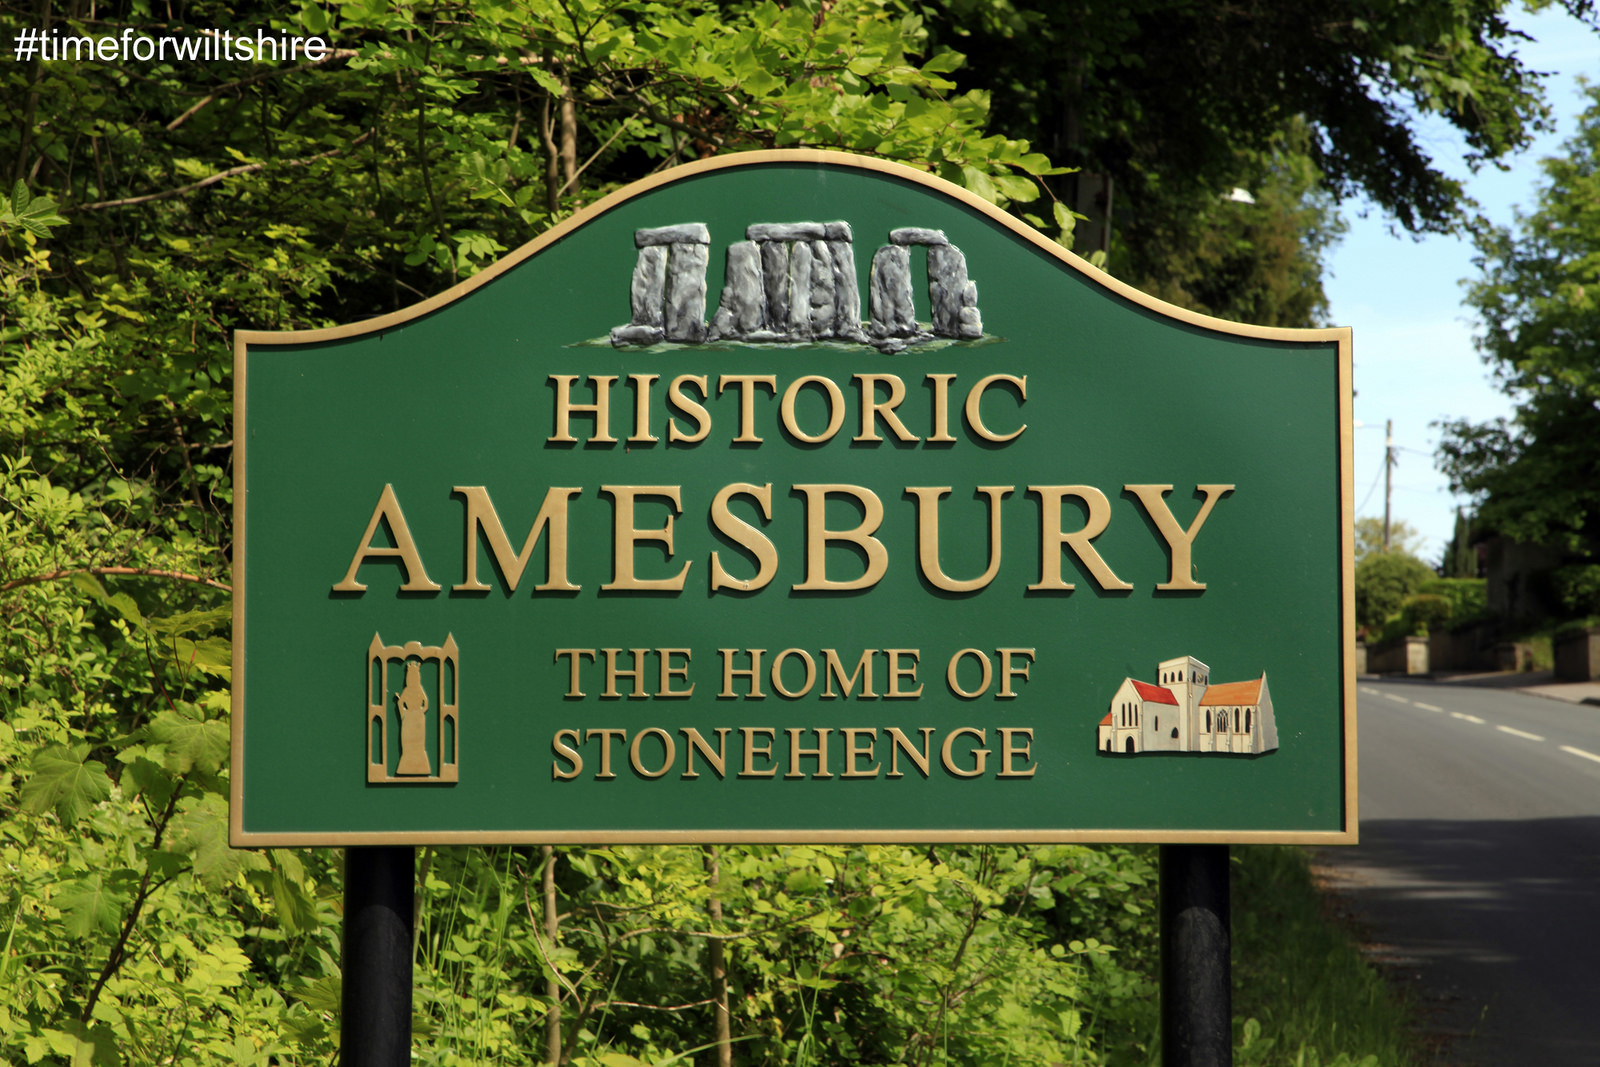 The town sign saying Historic Amesbury the home of Stoehenge © www.visitwiltshire.co.uk